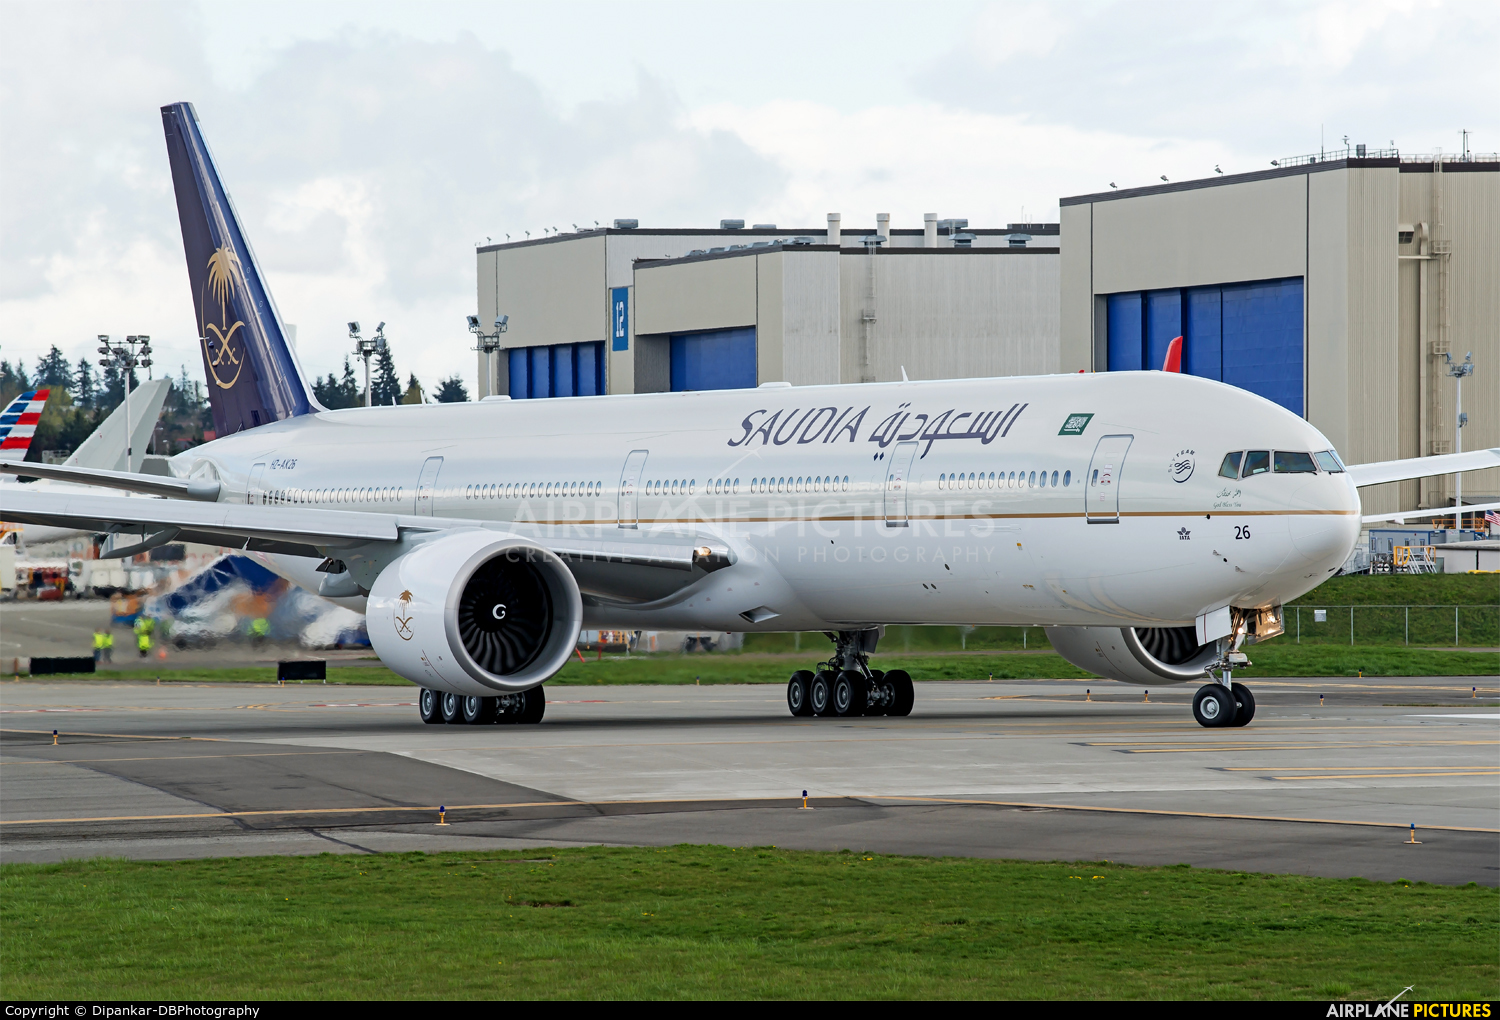 Saudi Arabian Airlines HZ-AK26 aircraft at Everett - Snohomish County / Paine Field